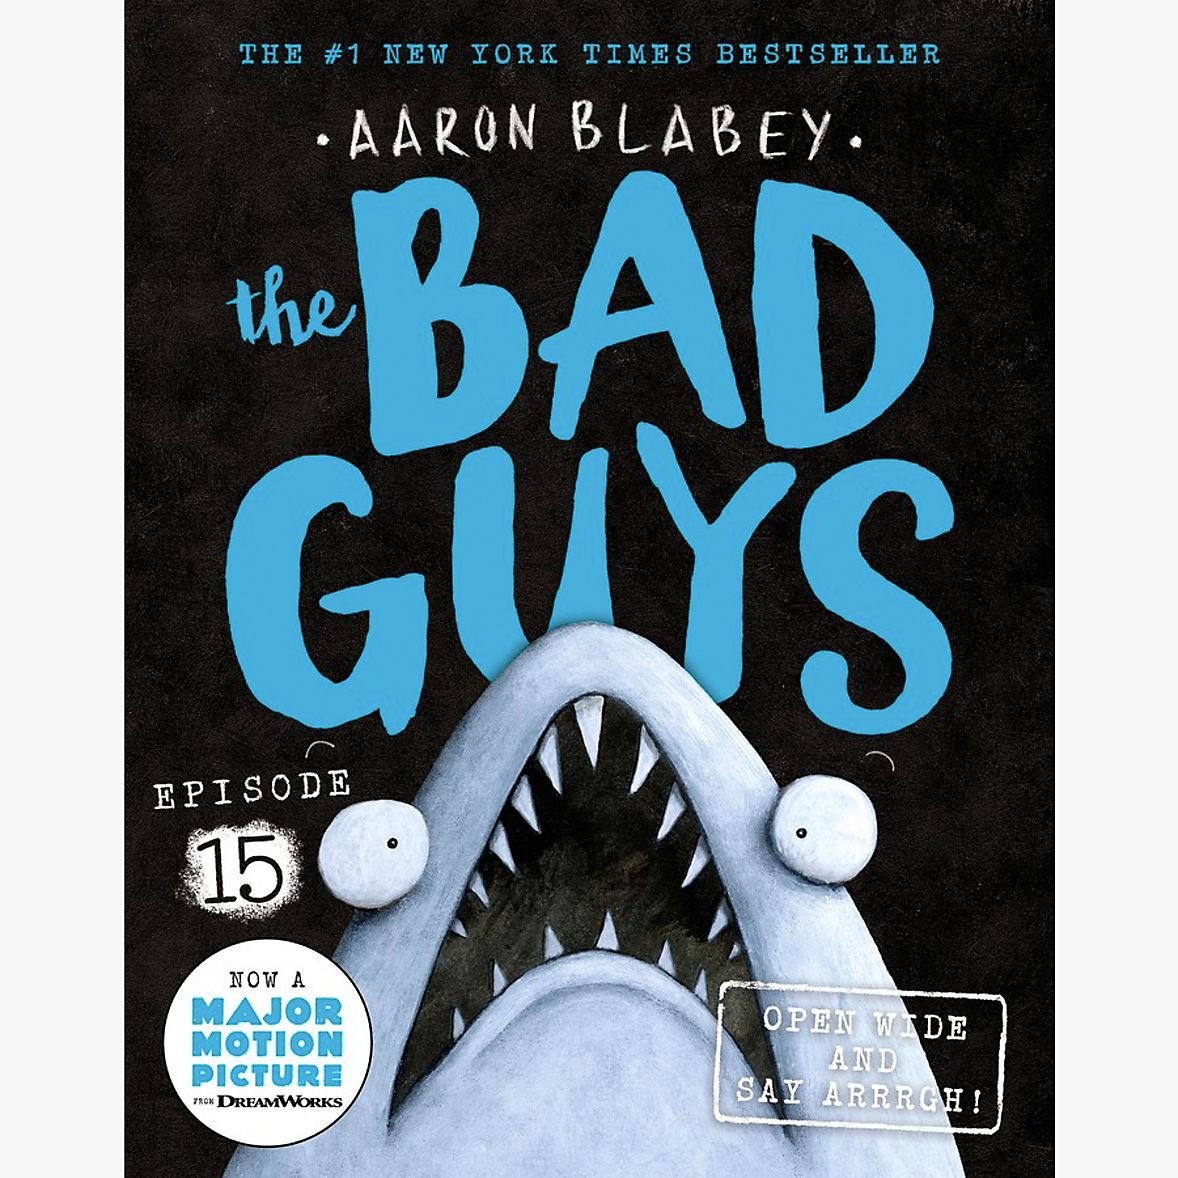 The Bad Guys: Open Wide and say Arrrgh! by Aaron Blabey